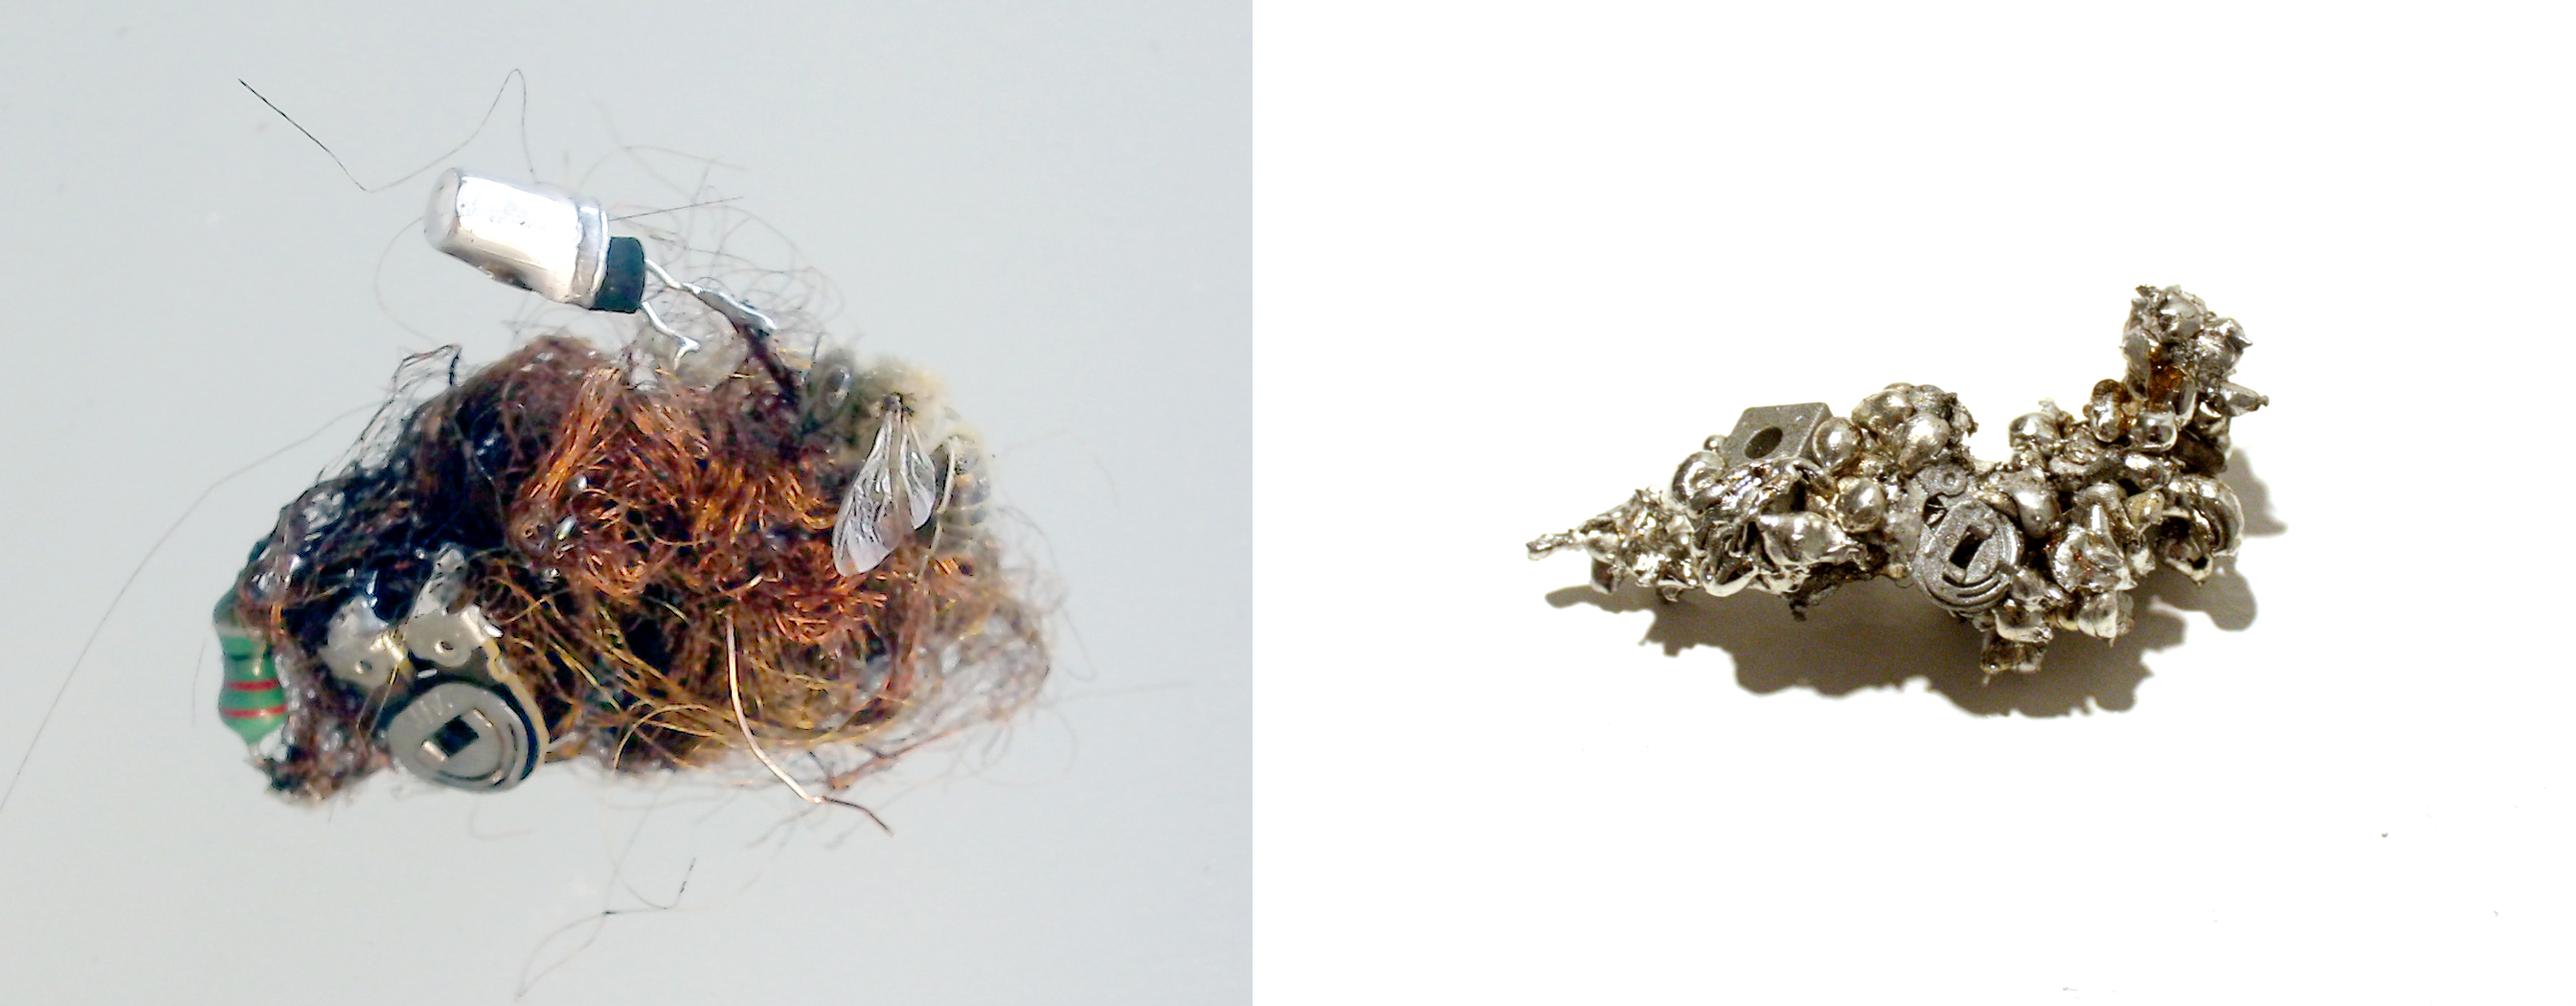 Left: Lee, Rosemary. ‘animinerlectroplantimal (study)’. 2013. Copper wire, electronic components, plant fibrr, bee. Right: Lee, Rosemary. ‘Fossil’. 2013. Electronics, solder.